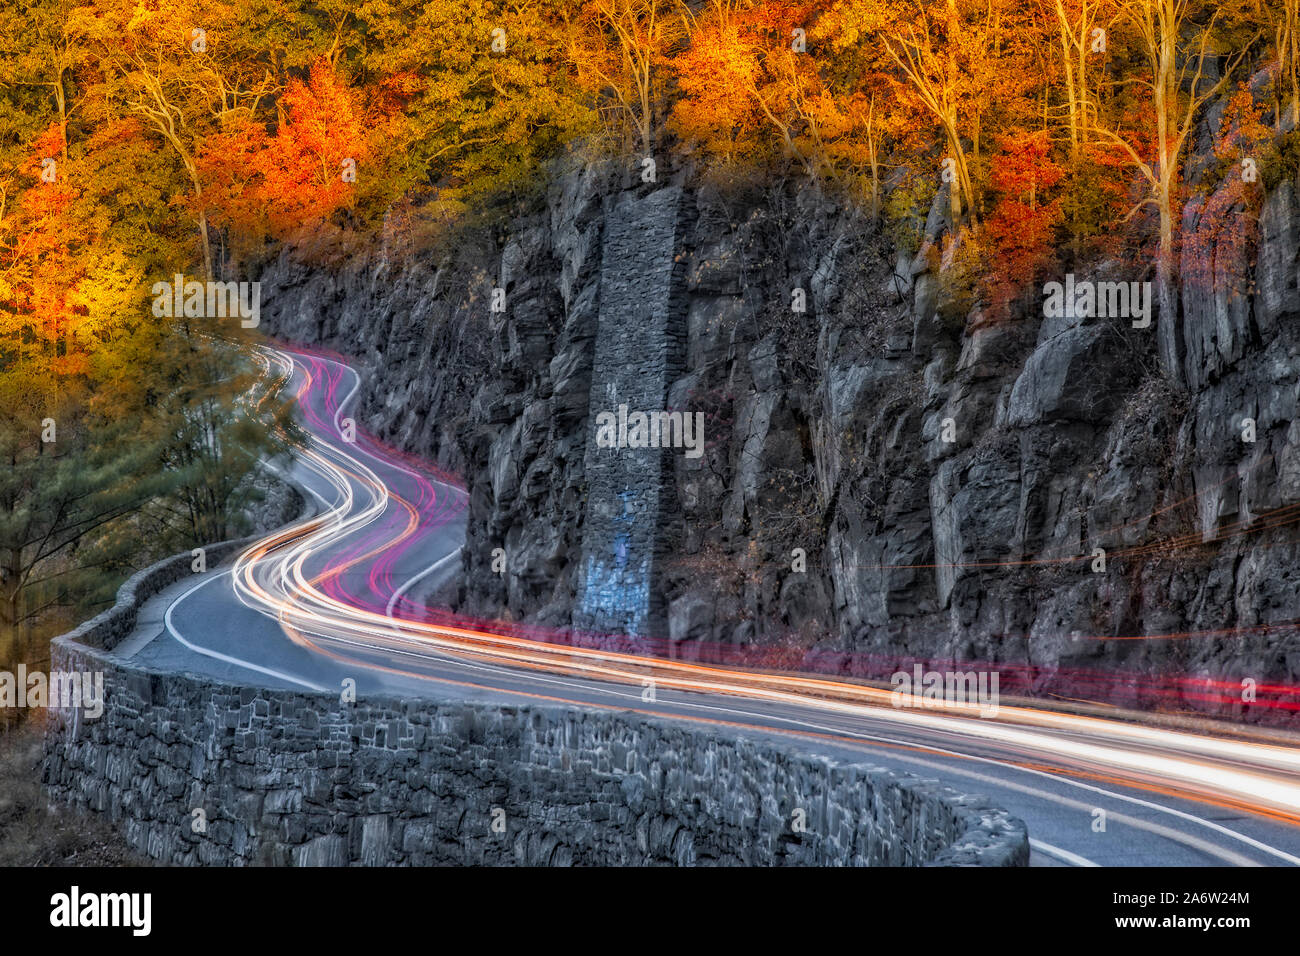 Hawks Nest Road - Car trails along the winding road during autumn in Port Jervis, New York. Stock Photo